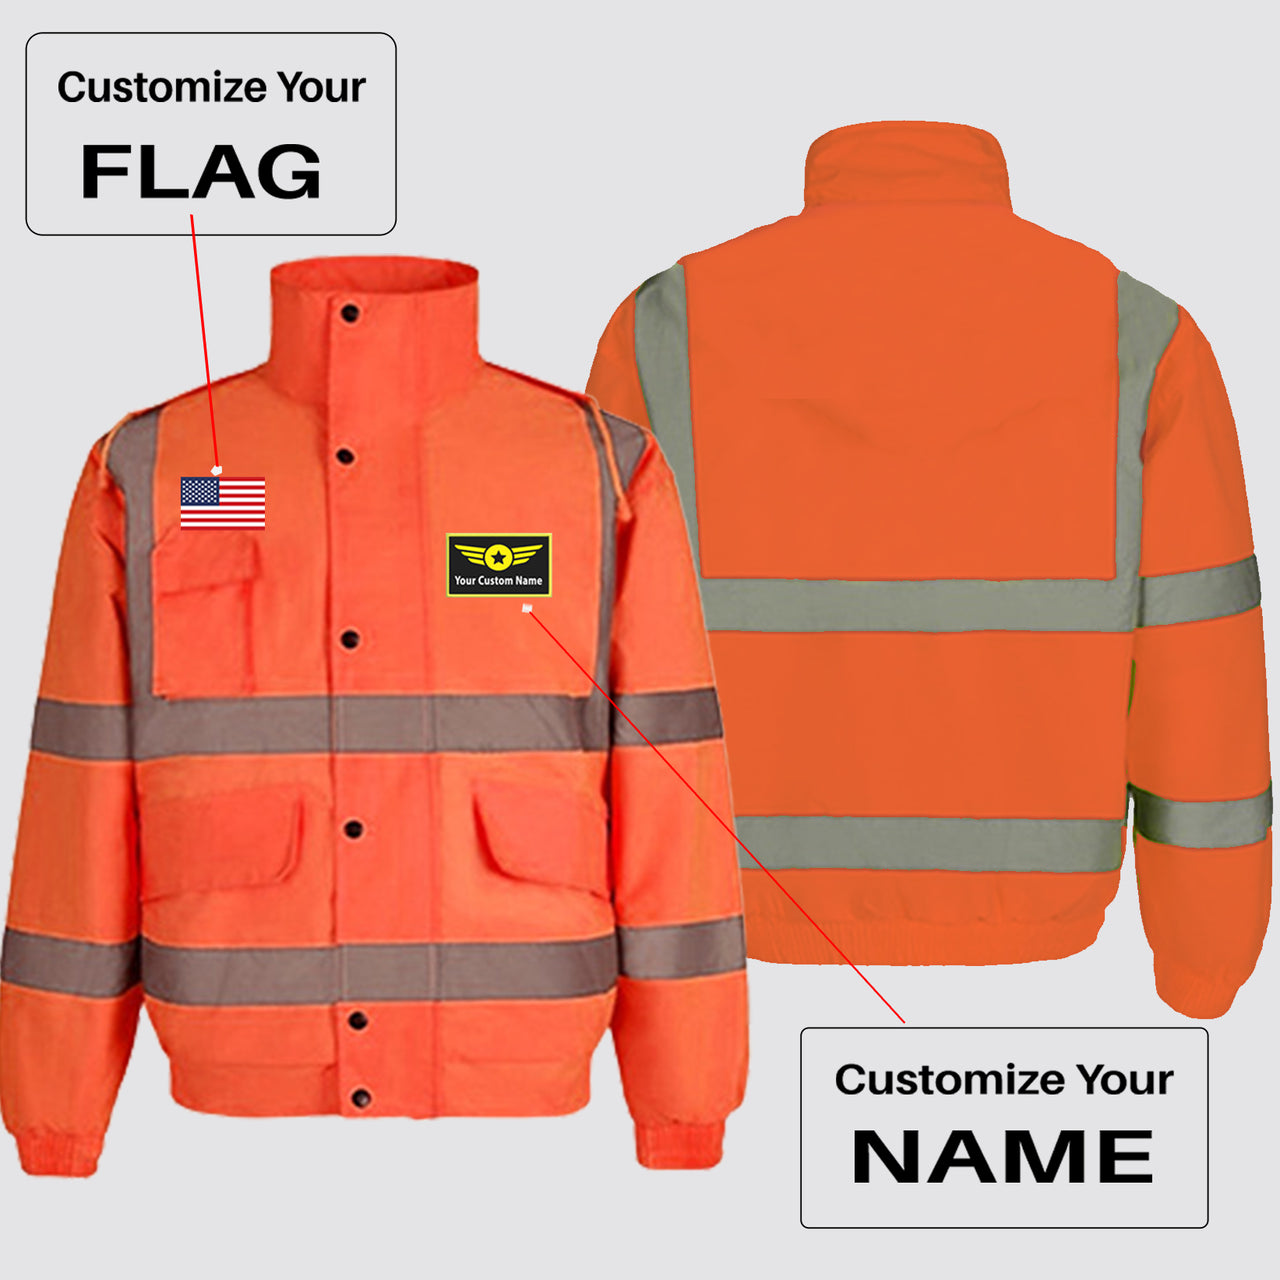 Custom Flag & Name with "Special Badge" Designed Reflective Winter Jackets